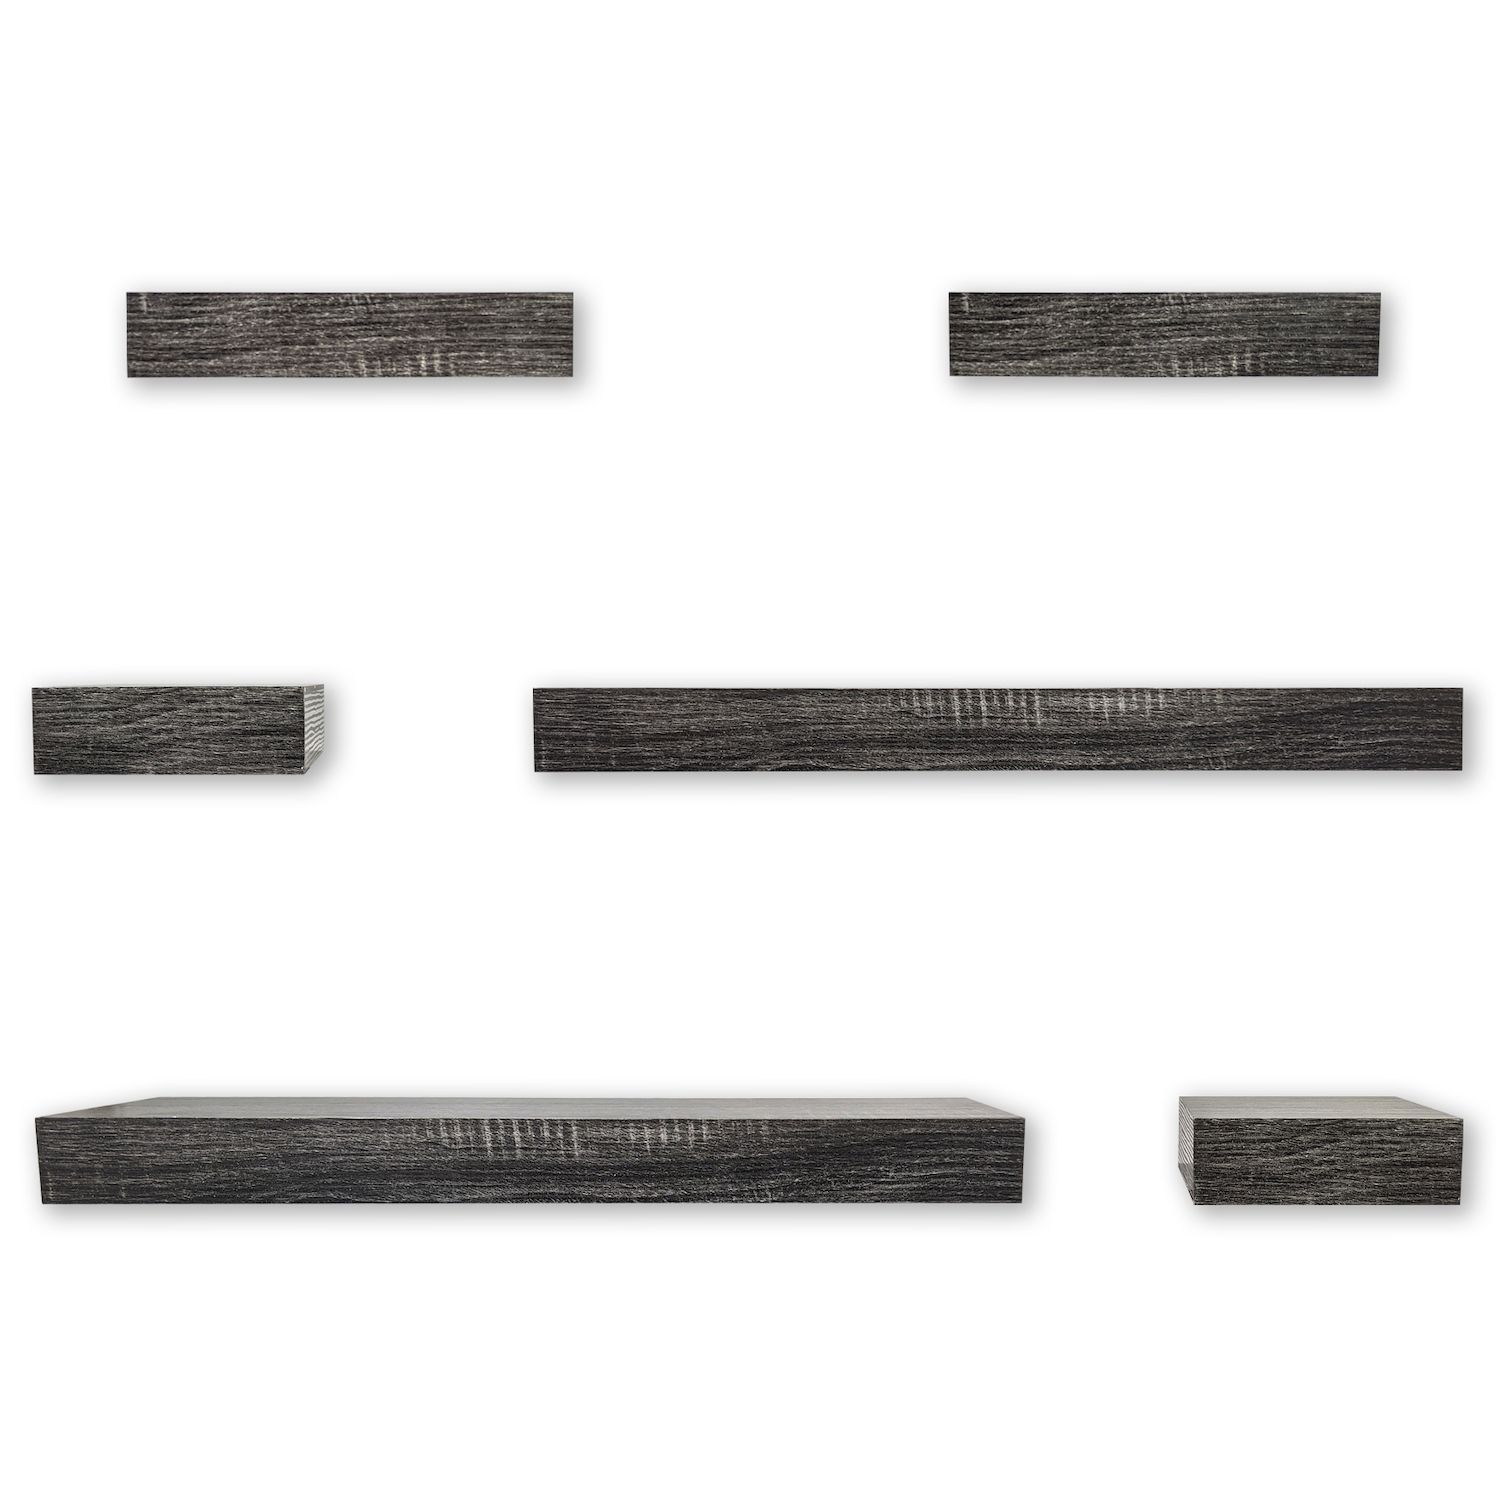 Image for Harbortown Linear Wall Shelf 6-piece Set at Kohl's.